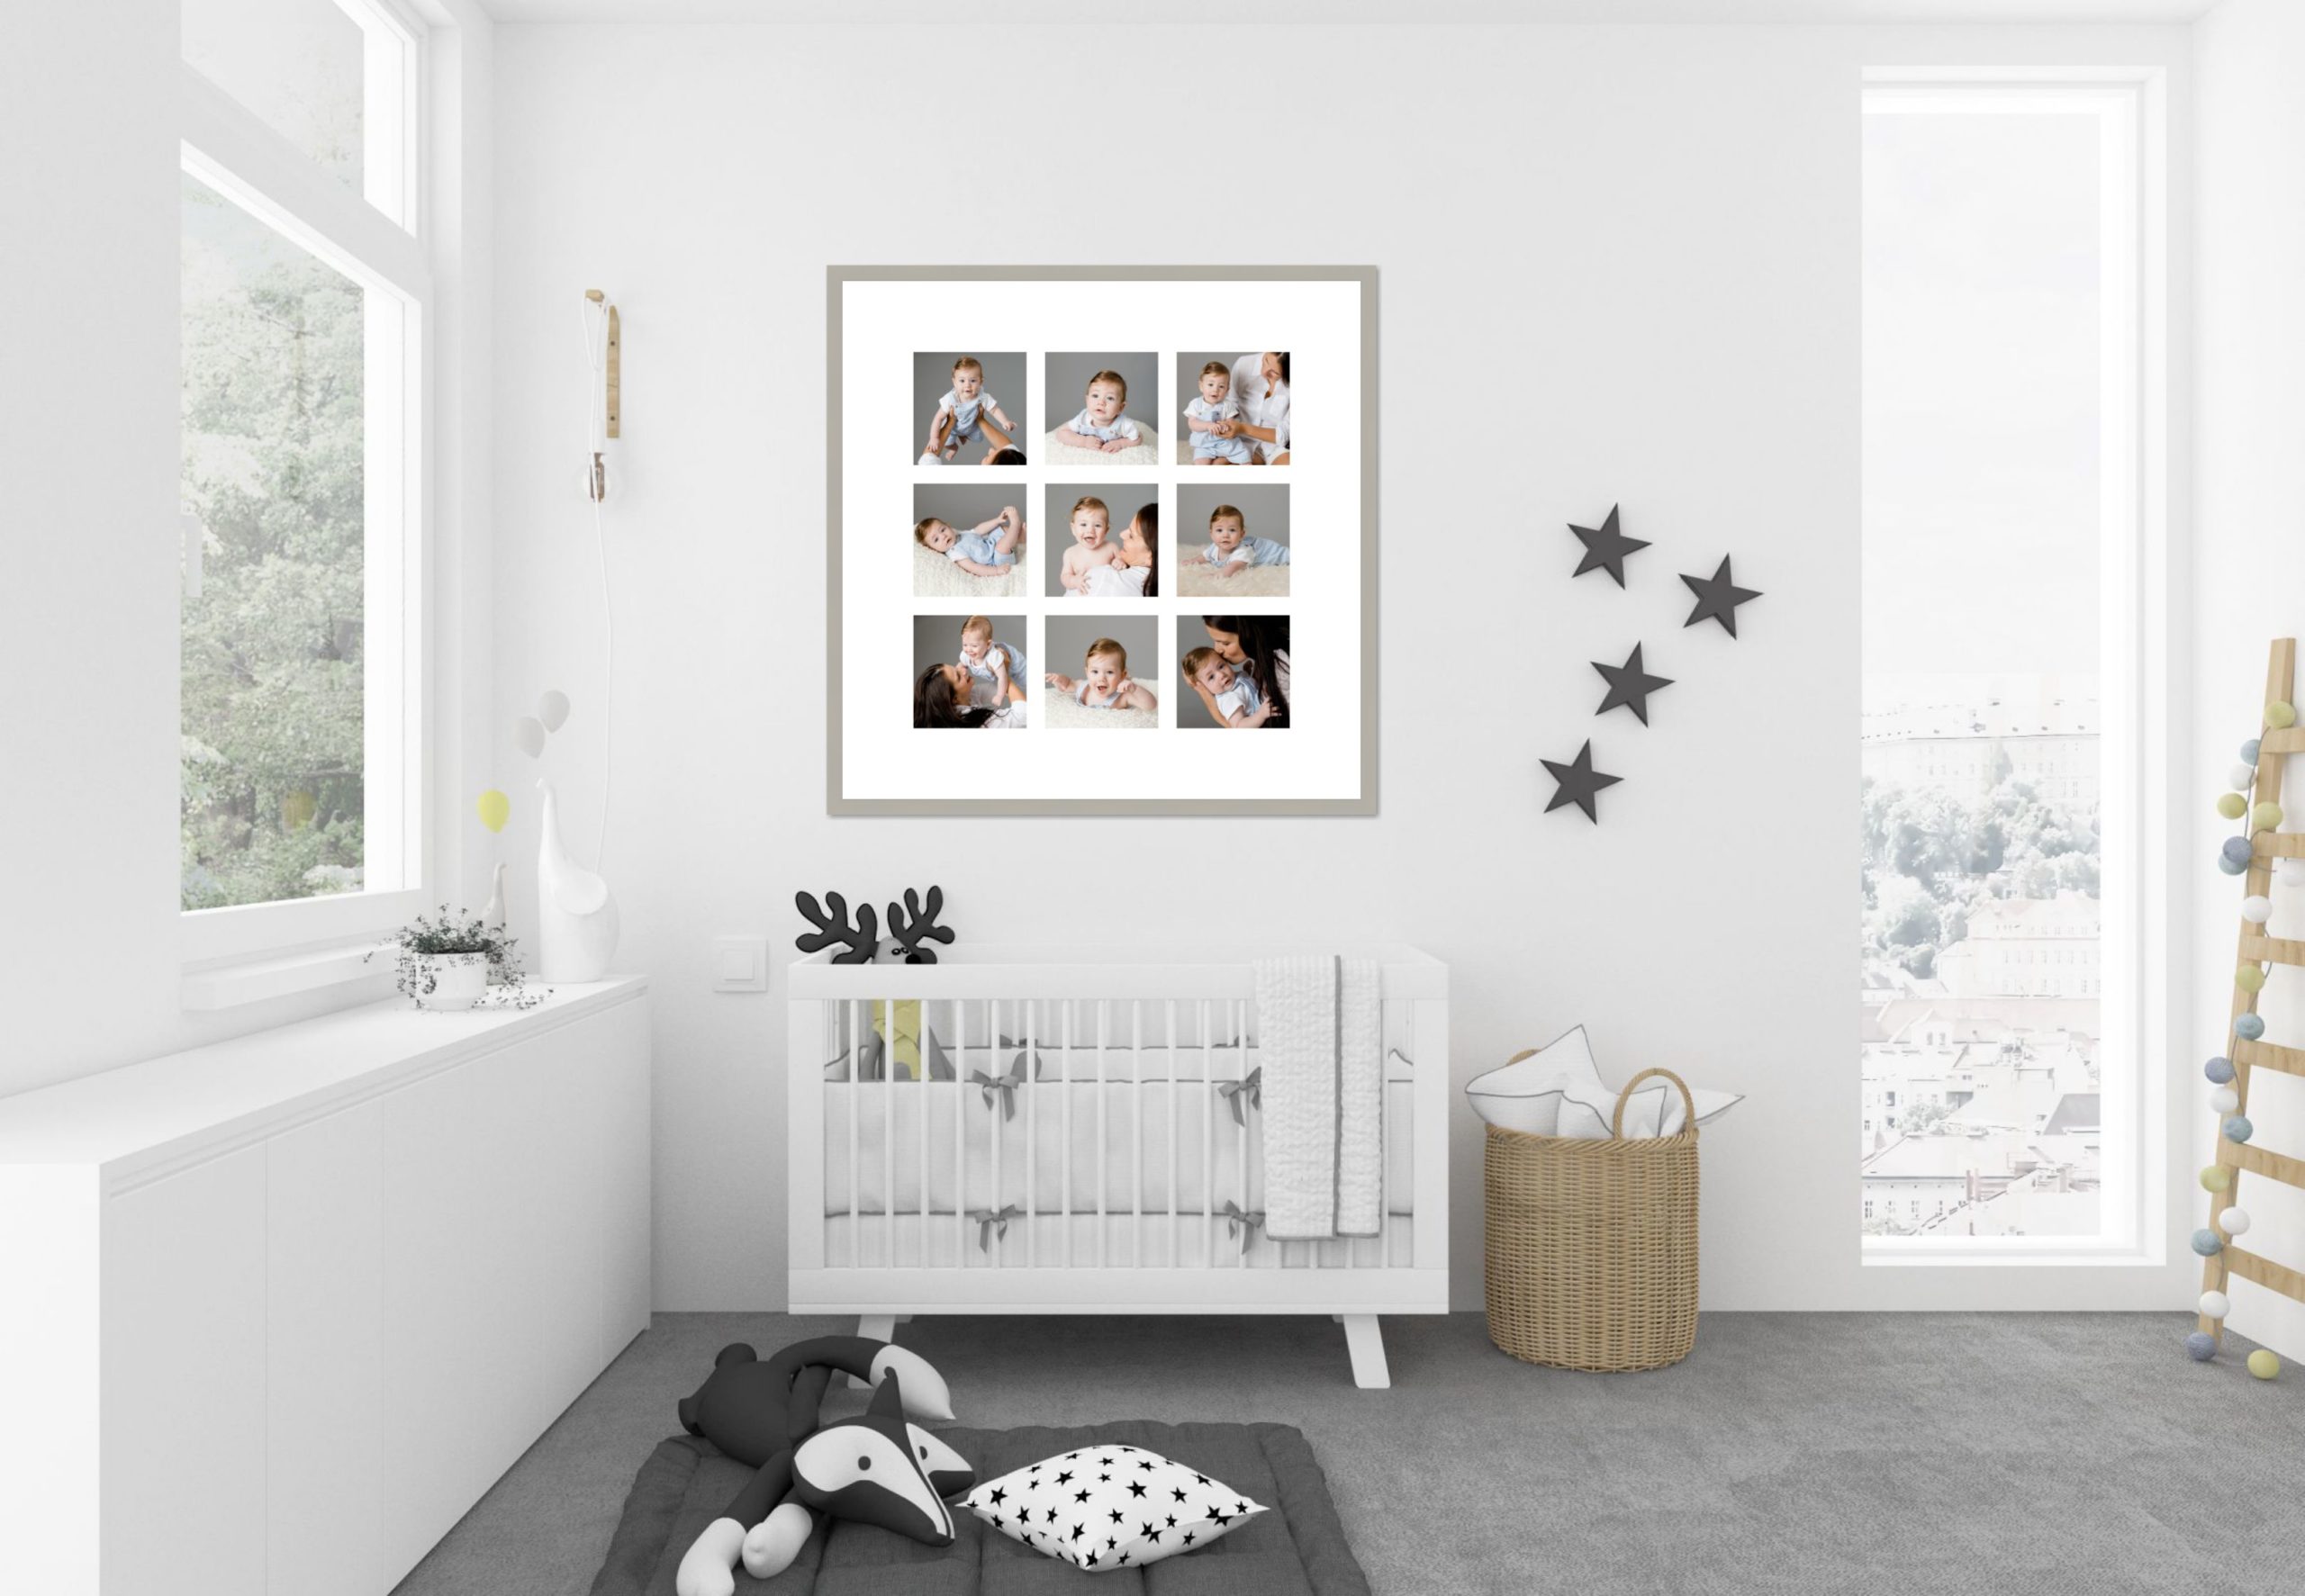 Room scene in white of a baby's room with a large story frame above the cot containing professional images of mother & child.